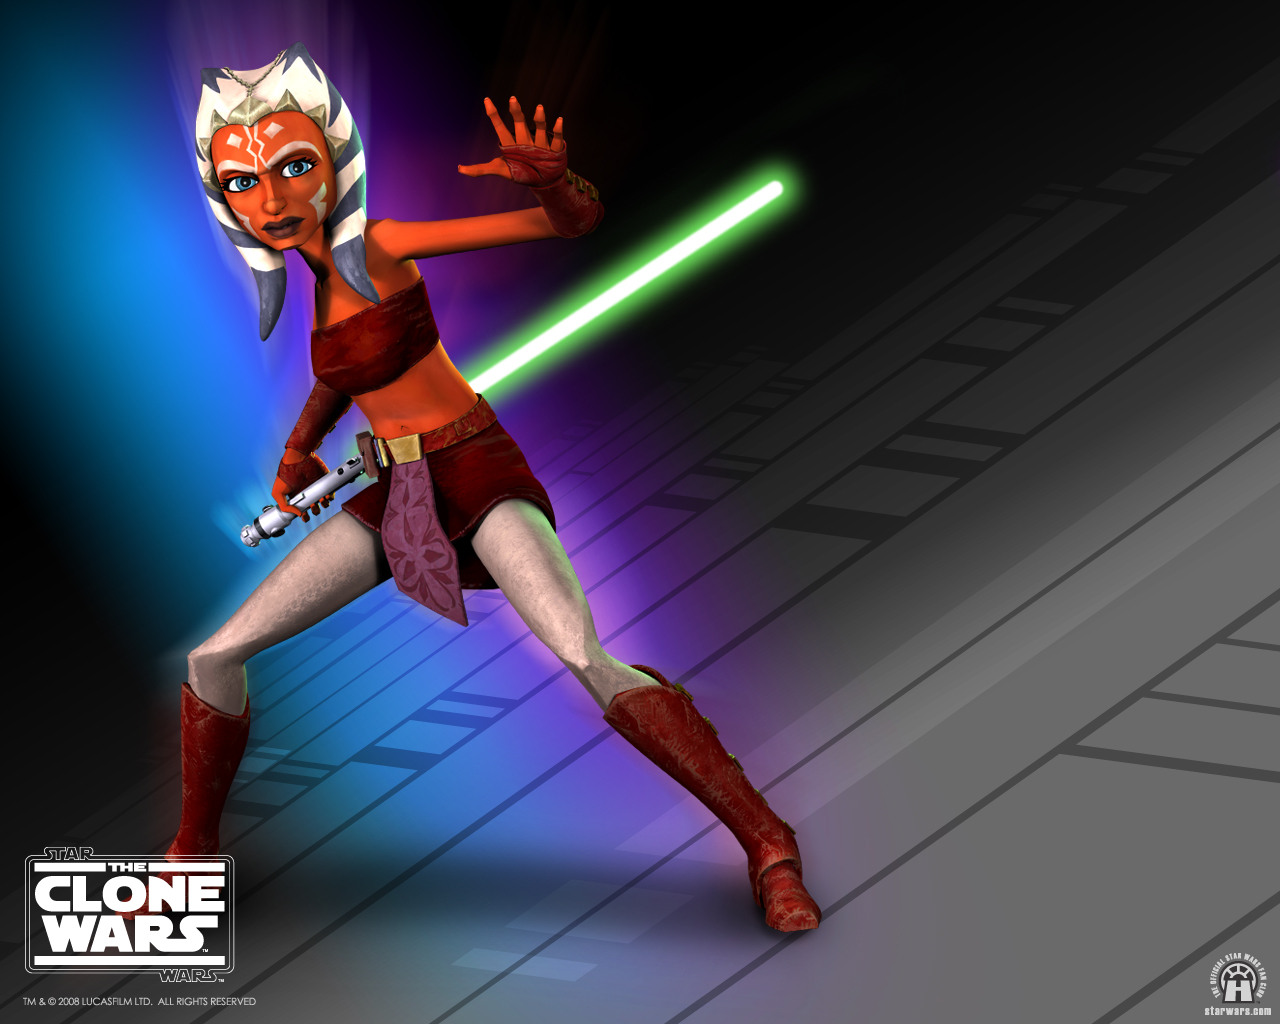 Tlcharger Star Wars: The Clone Wars Saison 03